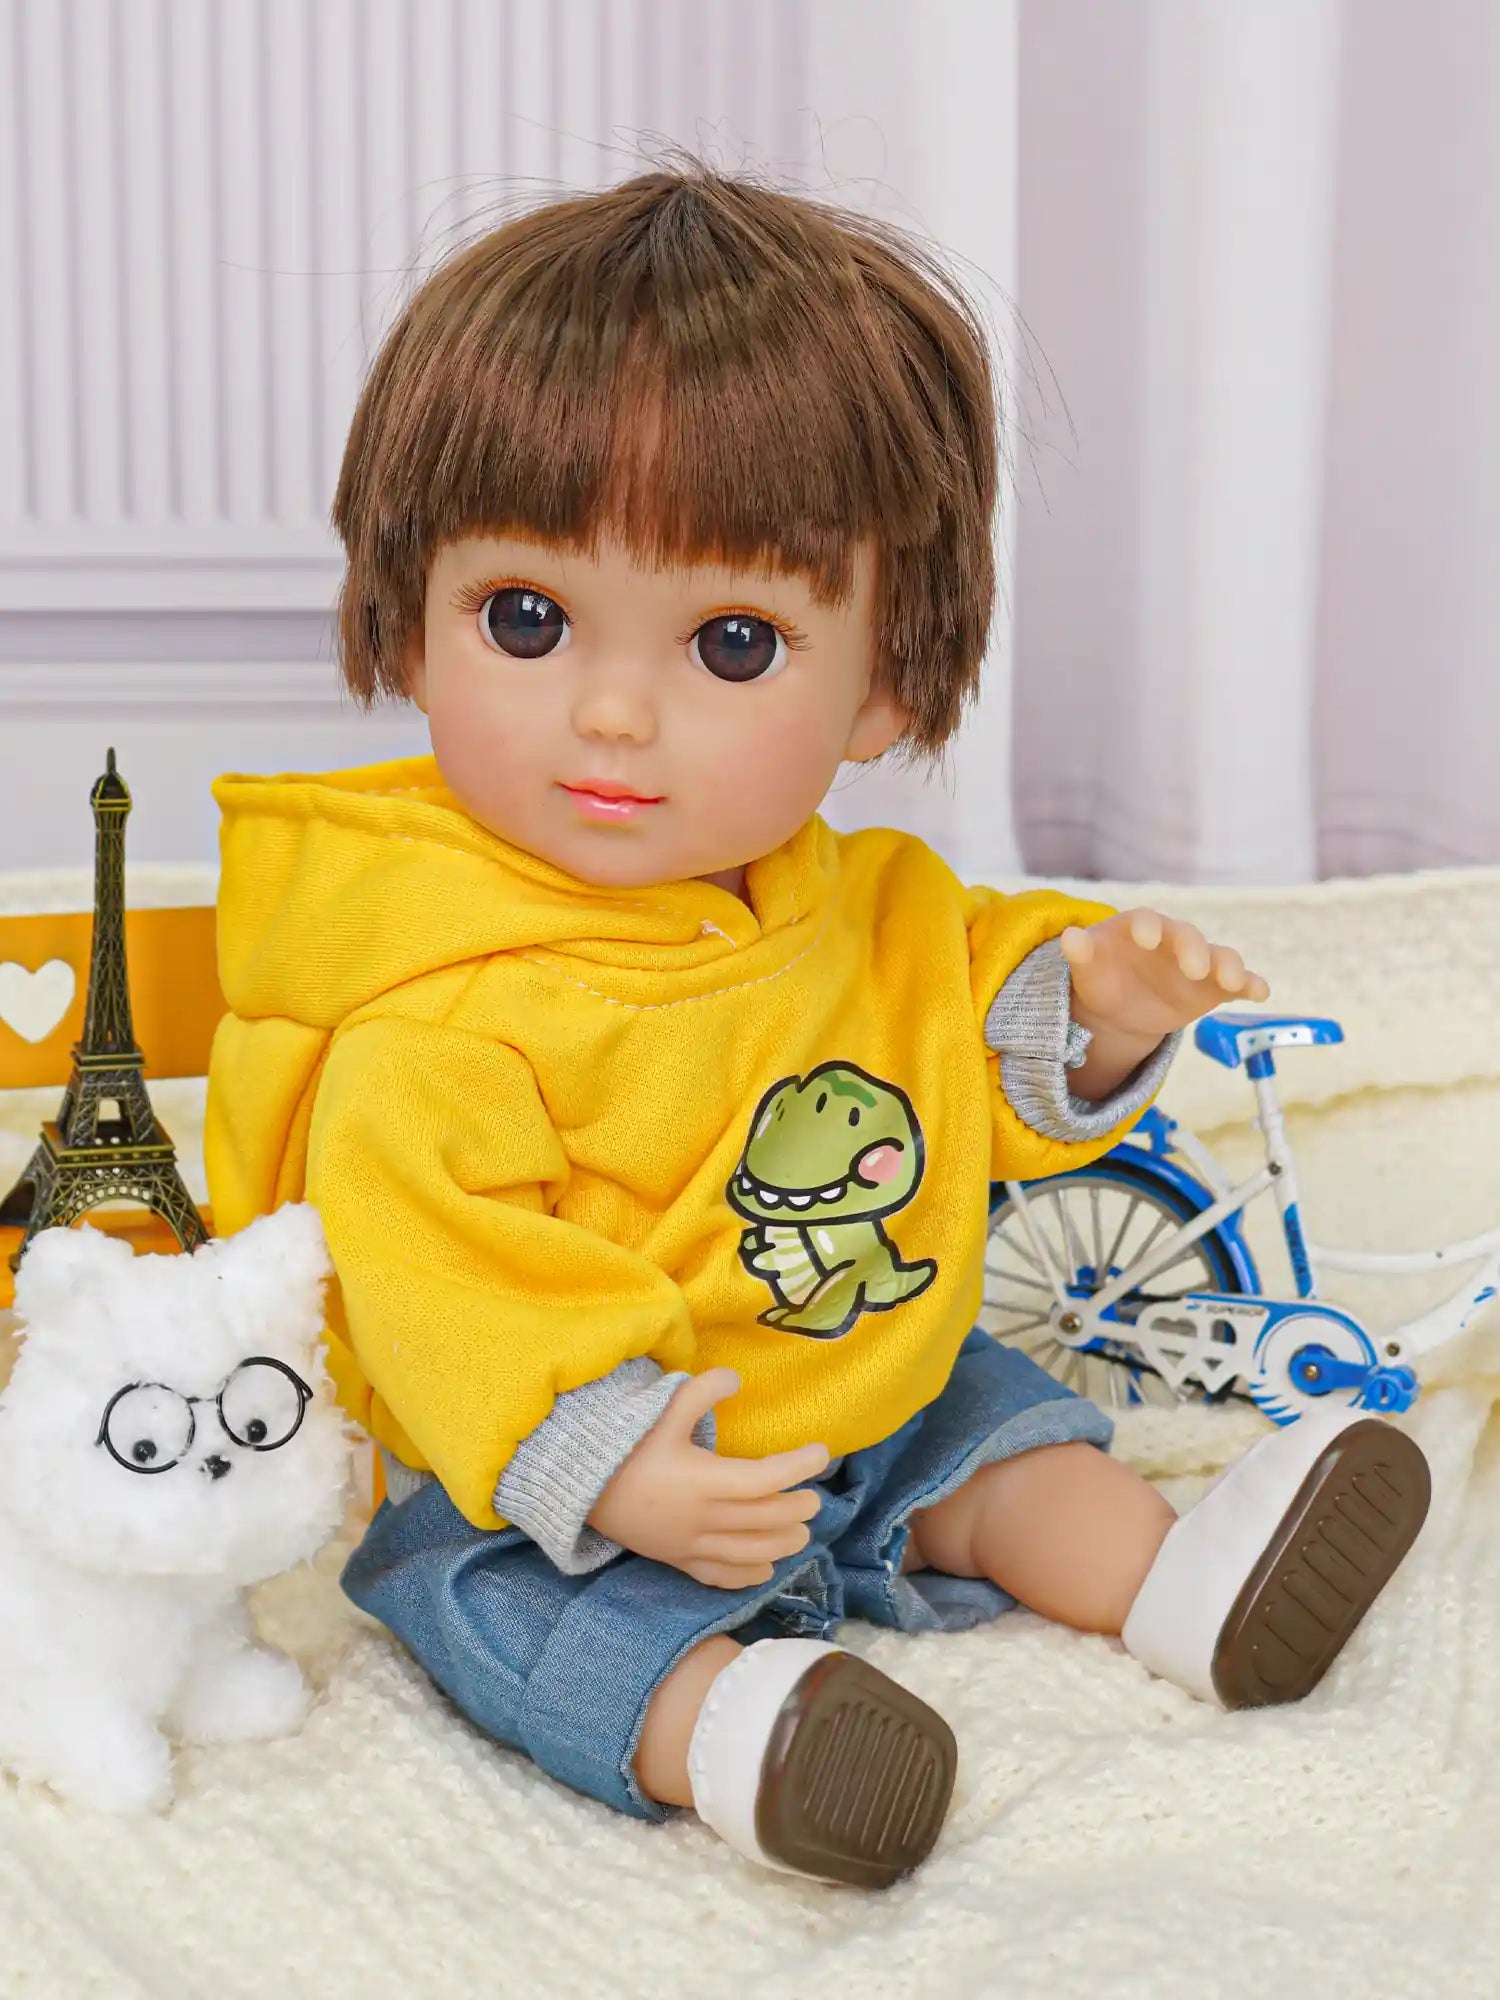 Doll in a vibrant outfit, sitting on a rug with a toy dog and a miniature bicycle nearby.